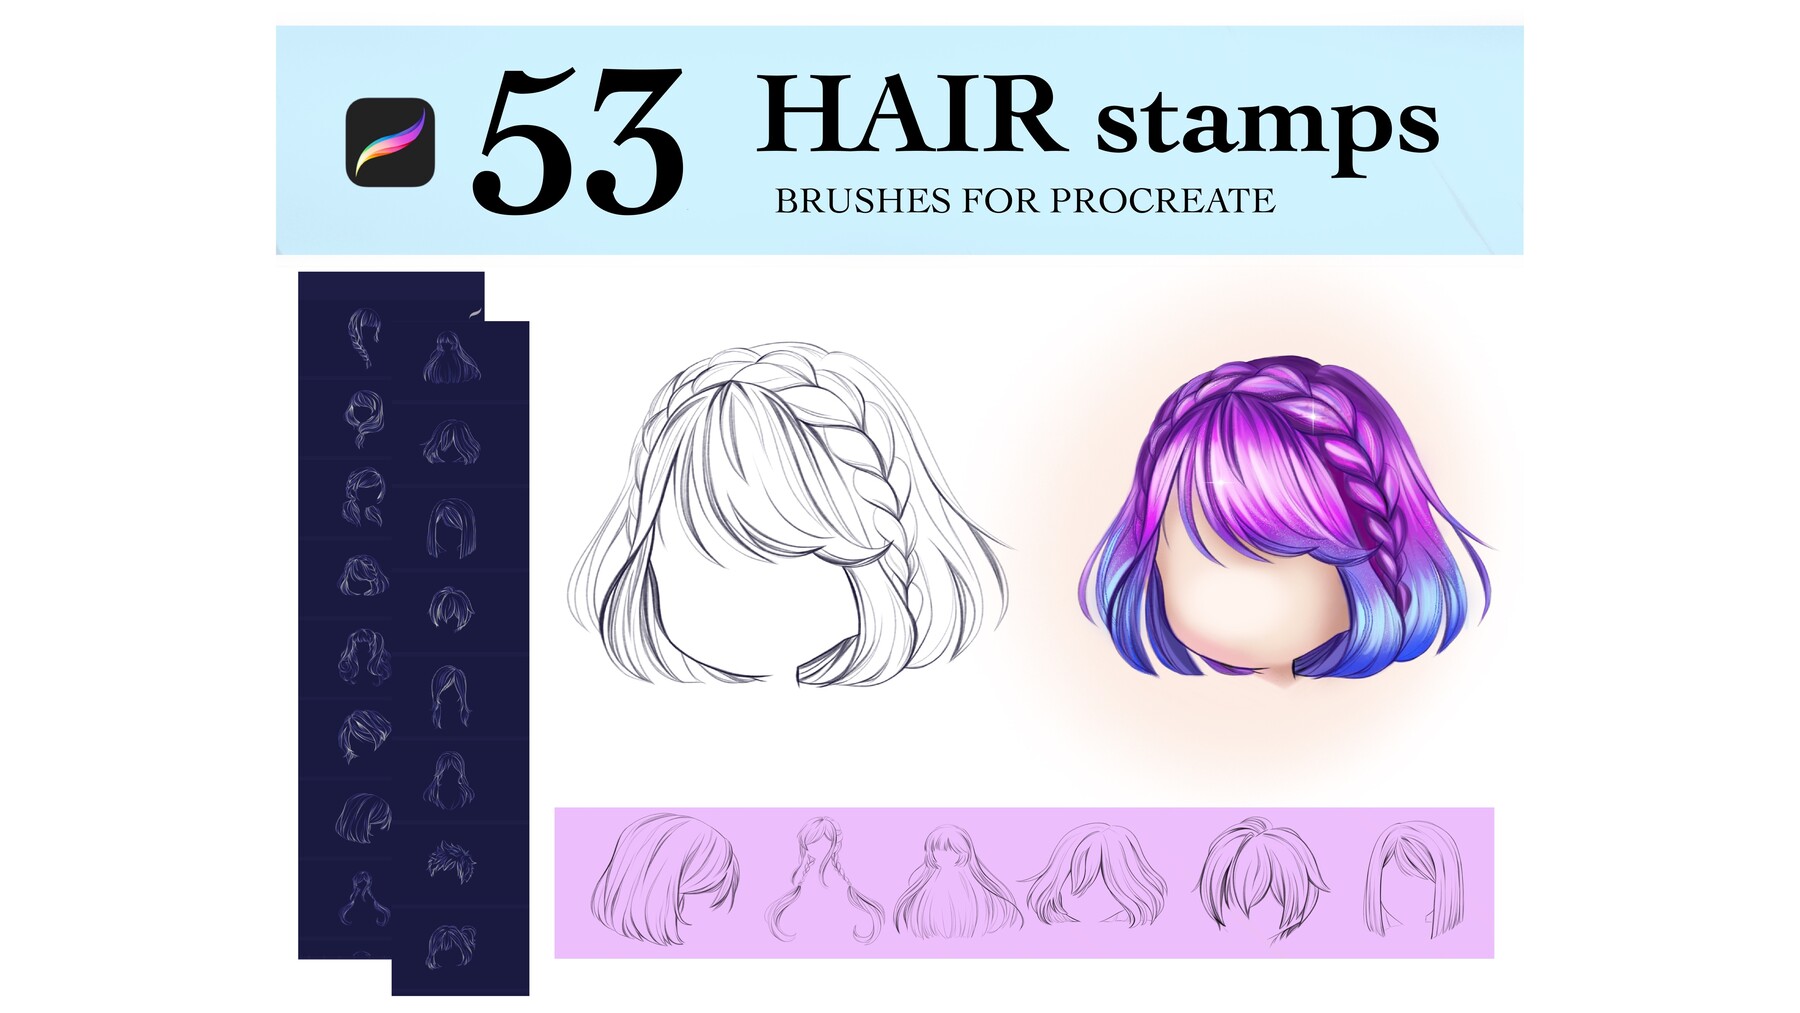 Procreate Manga Hairstyles Stamps. Anime Girl Hairstyle Stamp 